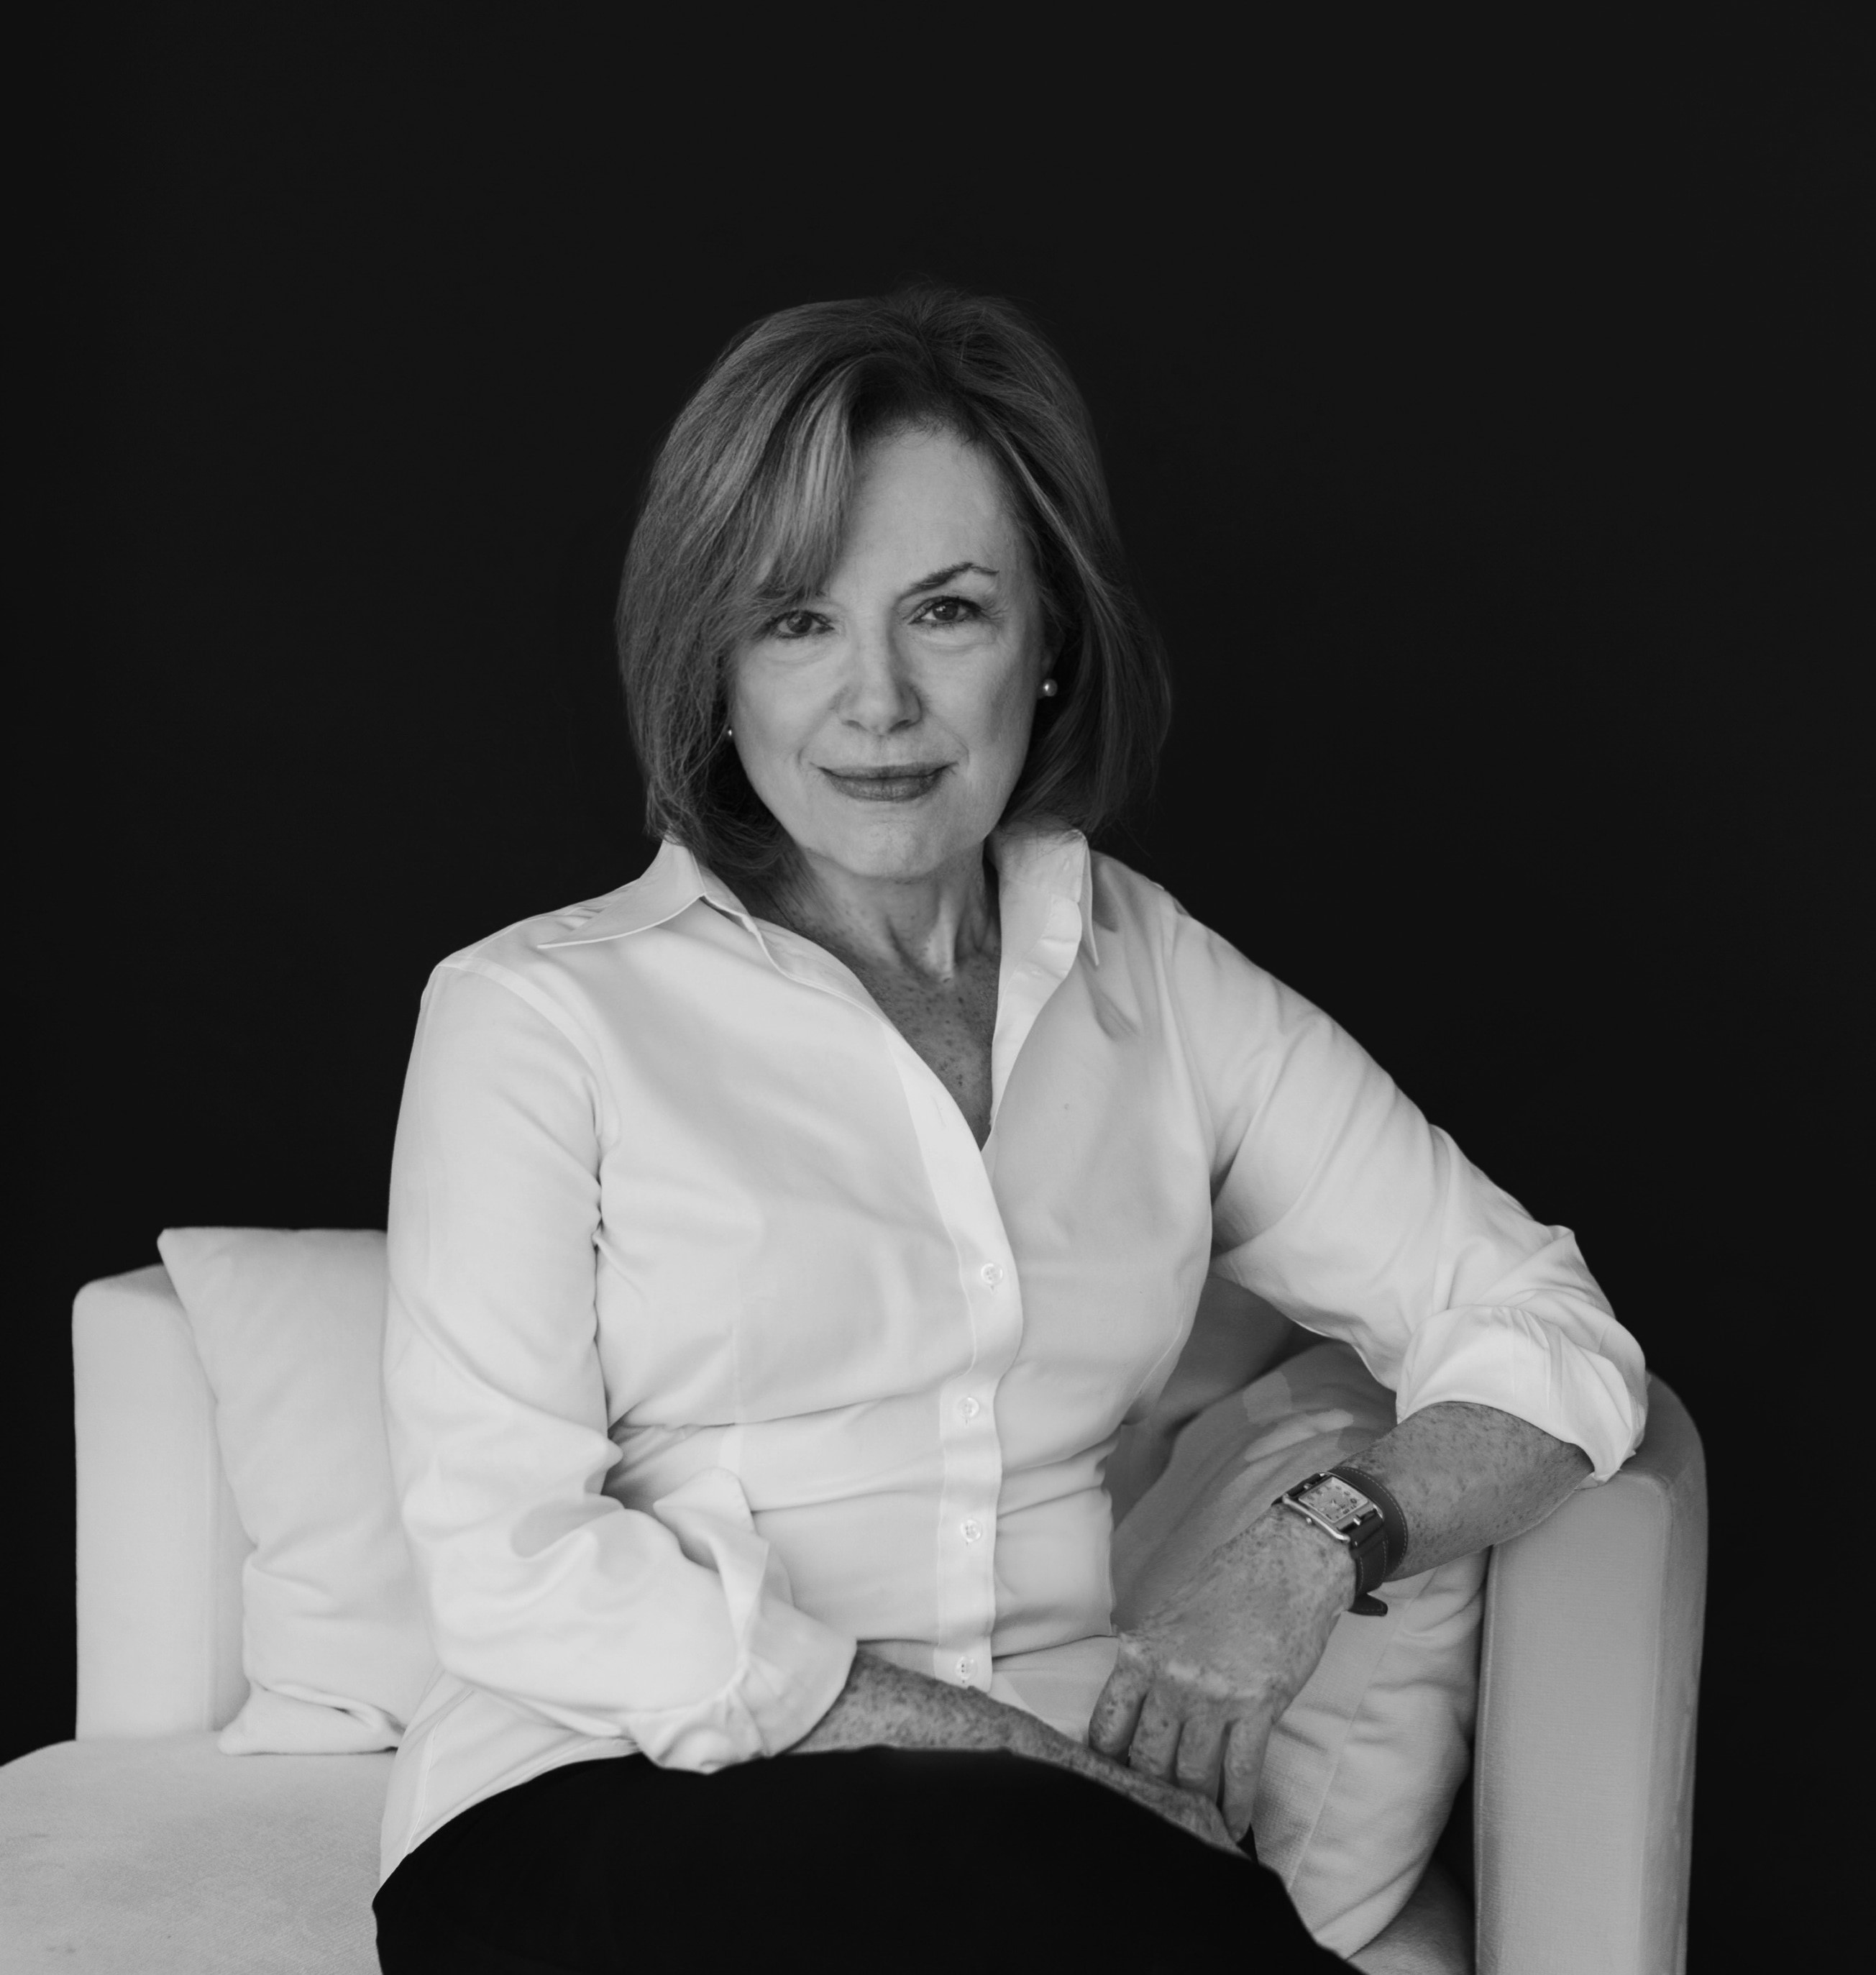 black and white portrait of Judy. She's dressed in business casual attire and sits on a plush armchair. She's looking directly into the camera, with a confident smile.